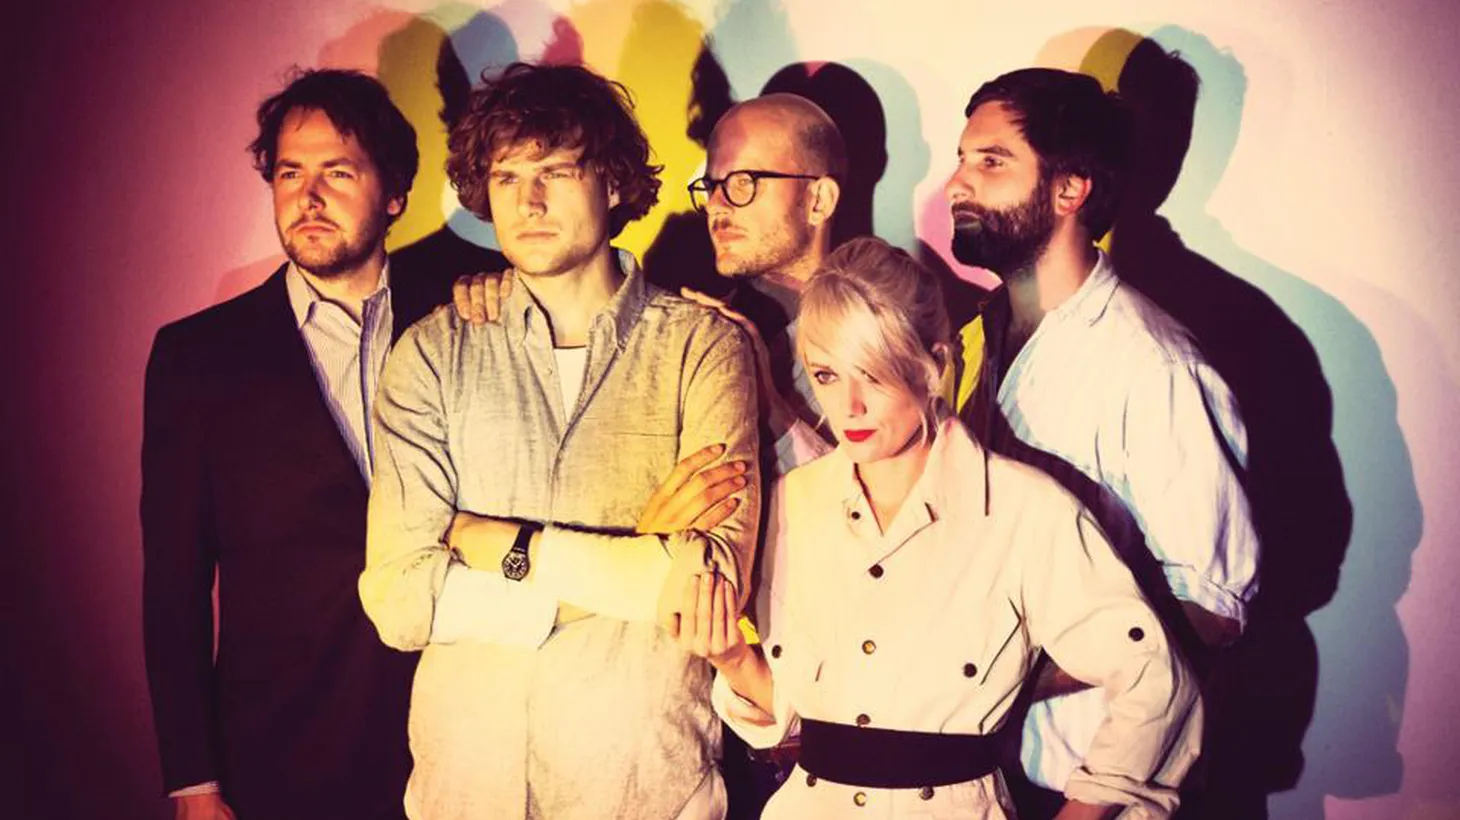 Swedish pop stars Shout Out Louds veer towards 80's new wave and modern indie rock in their latest songs.